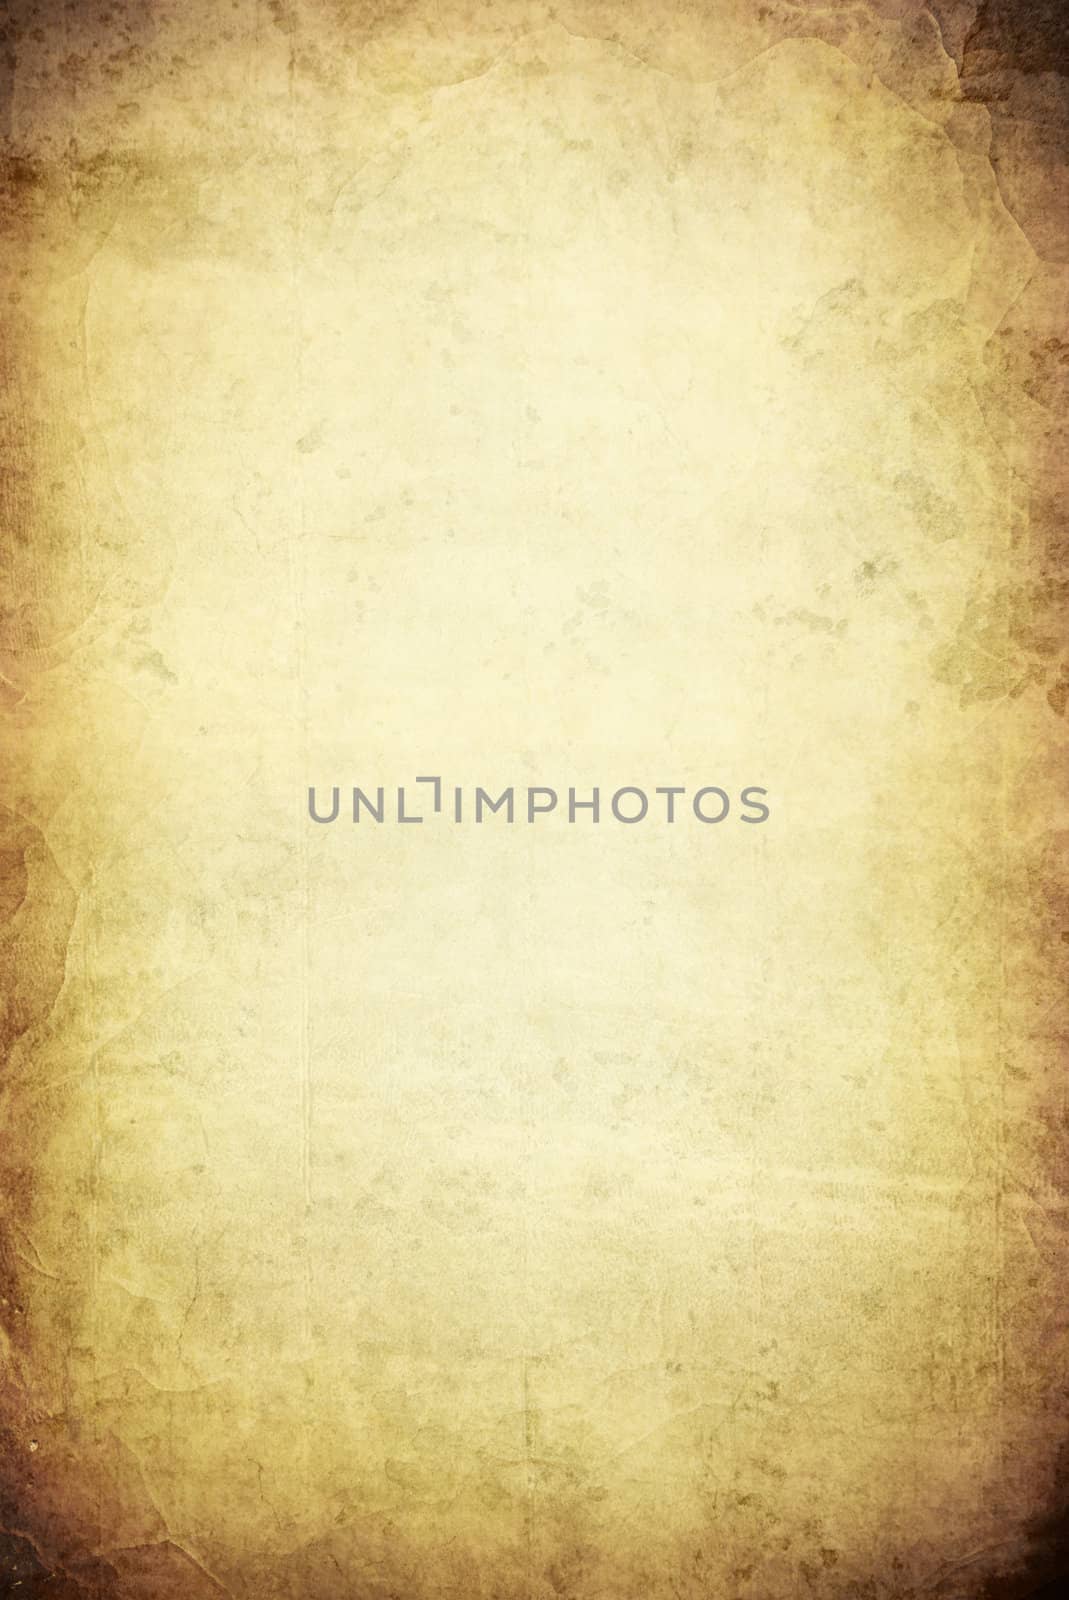 An image of an old grunge parchment background with space for your text